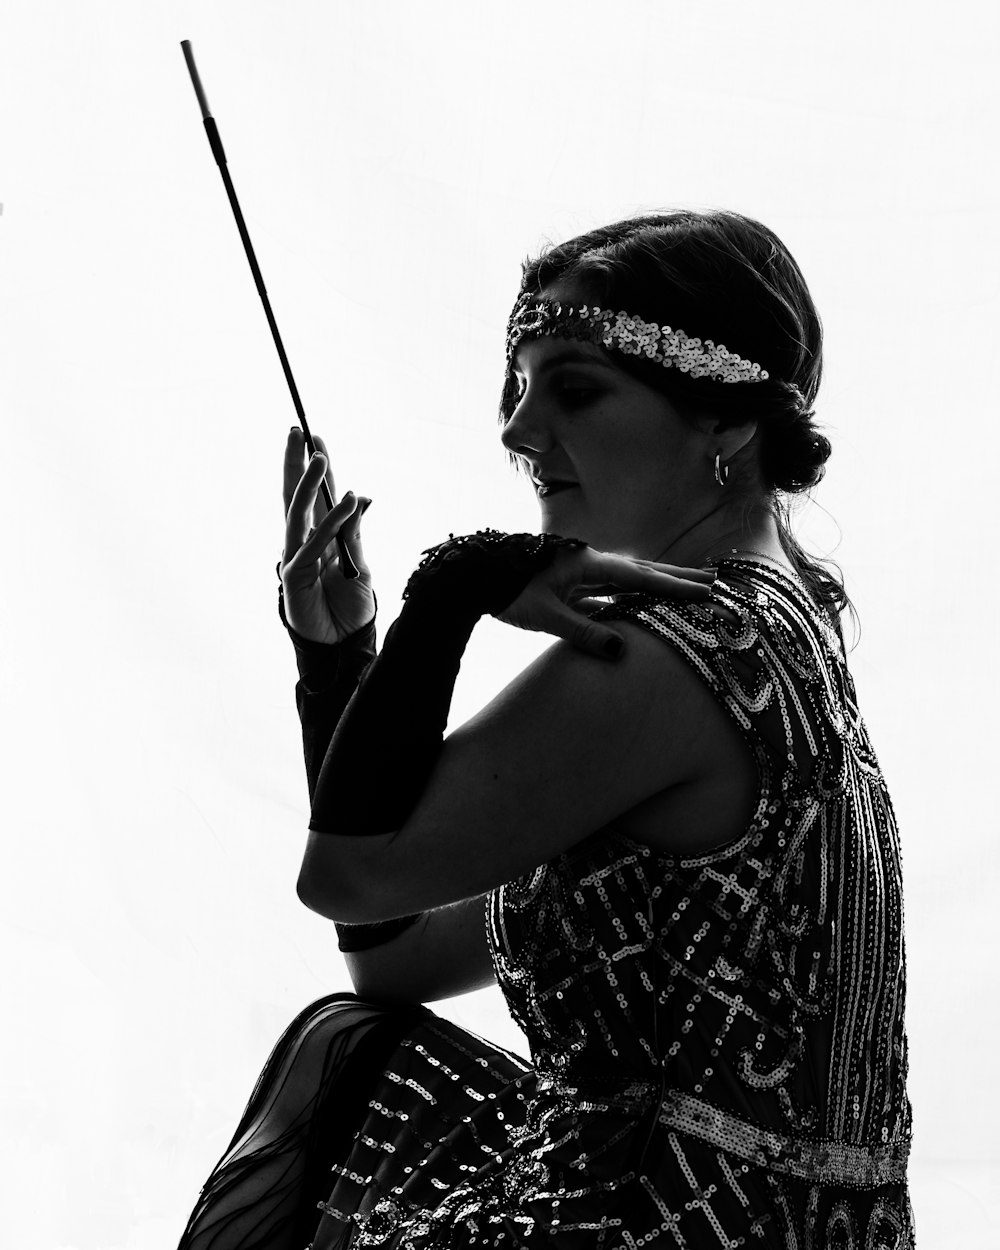 a woman holding a bow and arrow